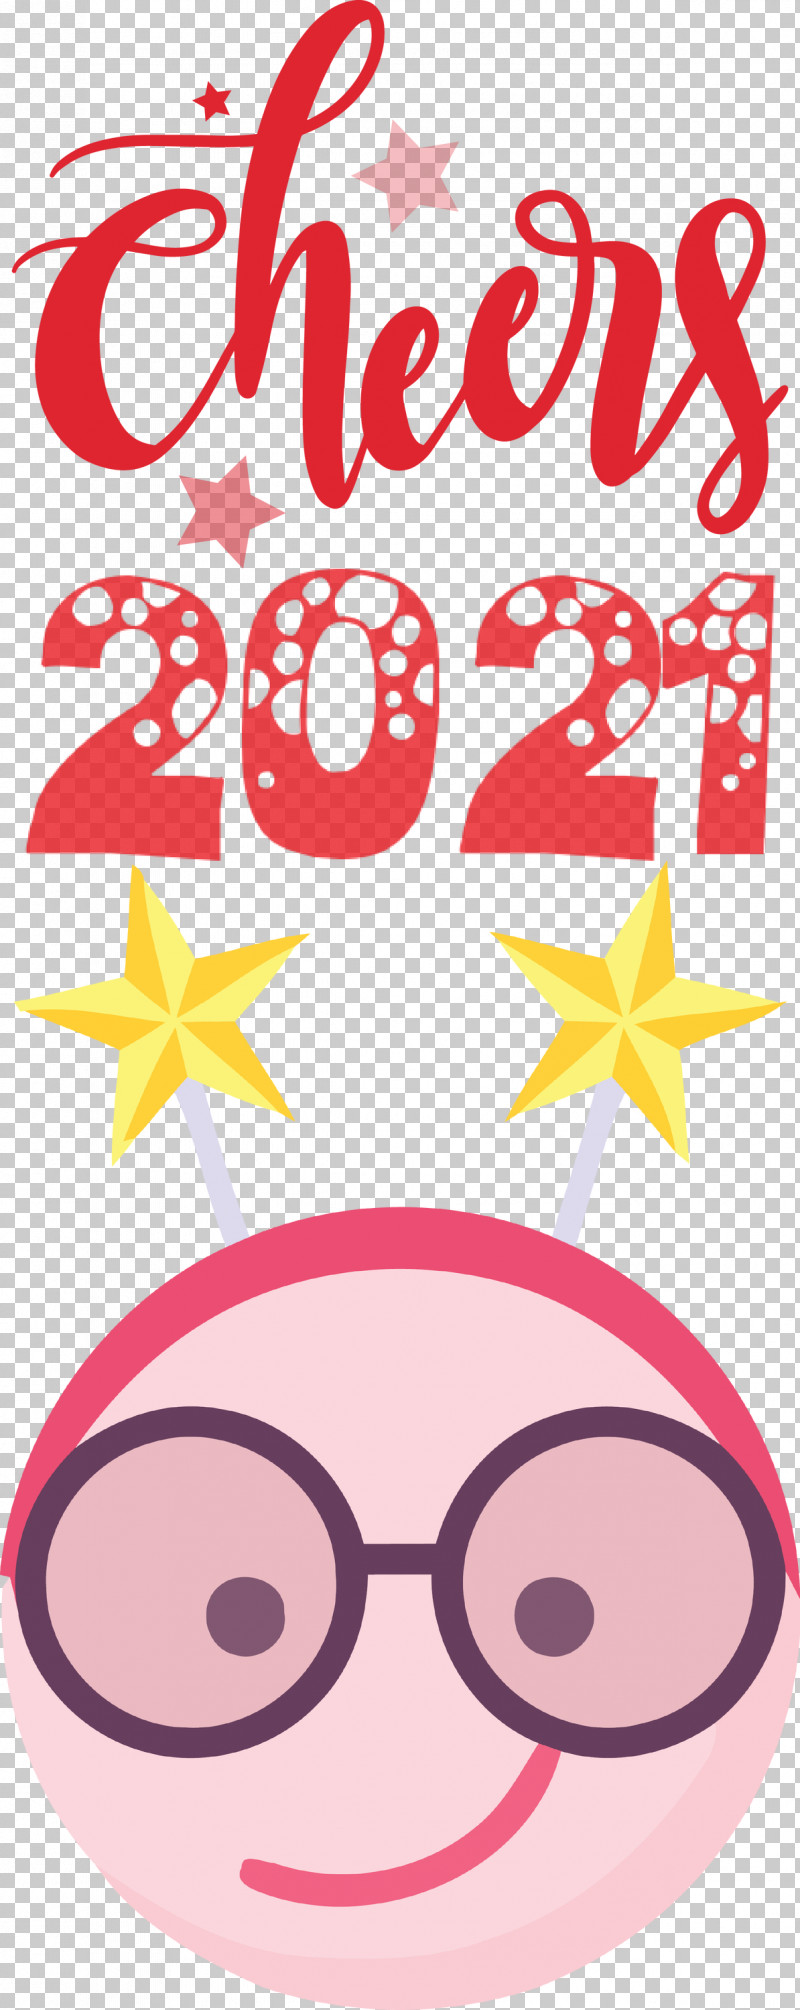 Cheers 2021 New Year Cheers.2021 New Year PNG, Clipart, Cartoon, Cheers 2021 New Year, Emoticon, Geometry, Happiness Free PNG Download